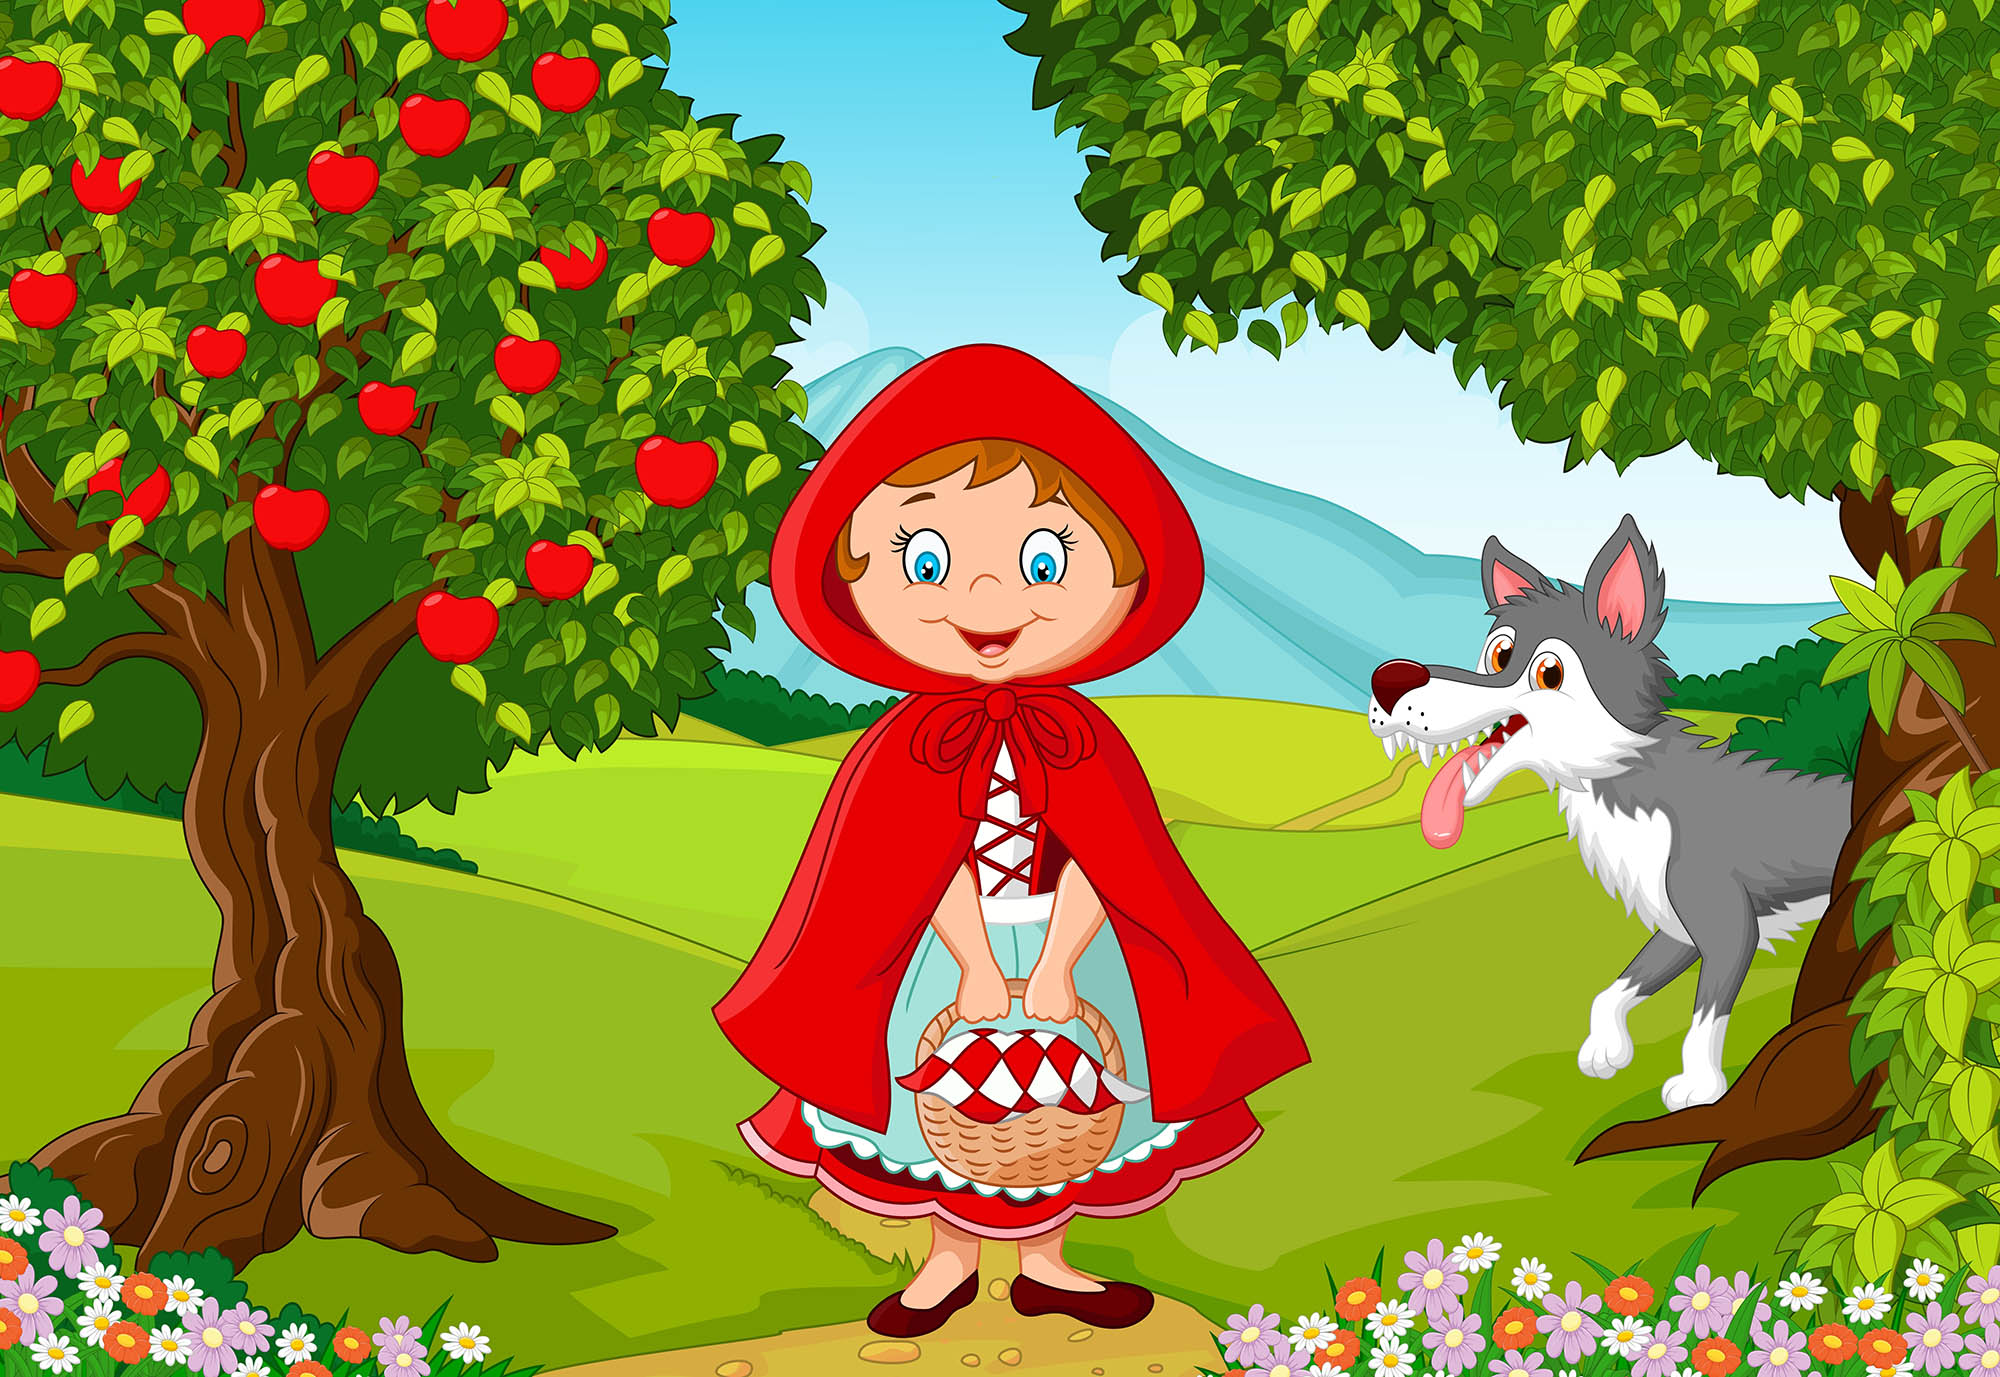 the-story-of-the-little-red-riding-hood-article